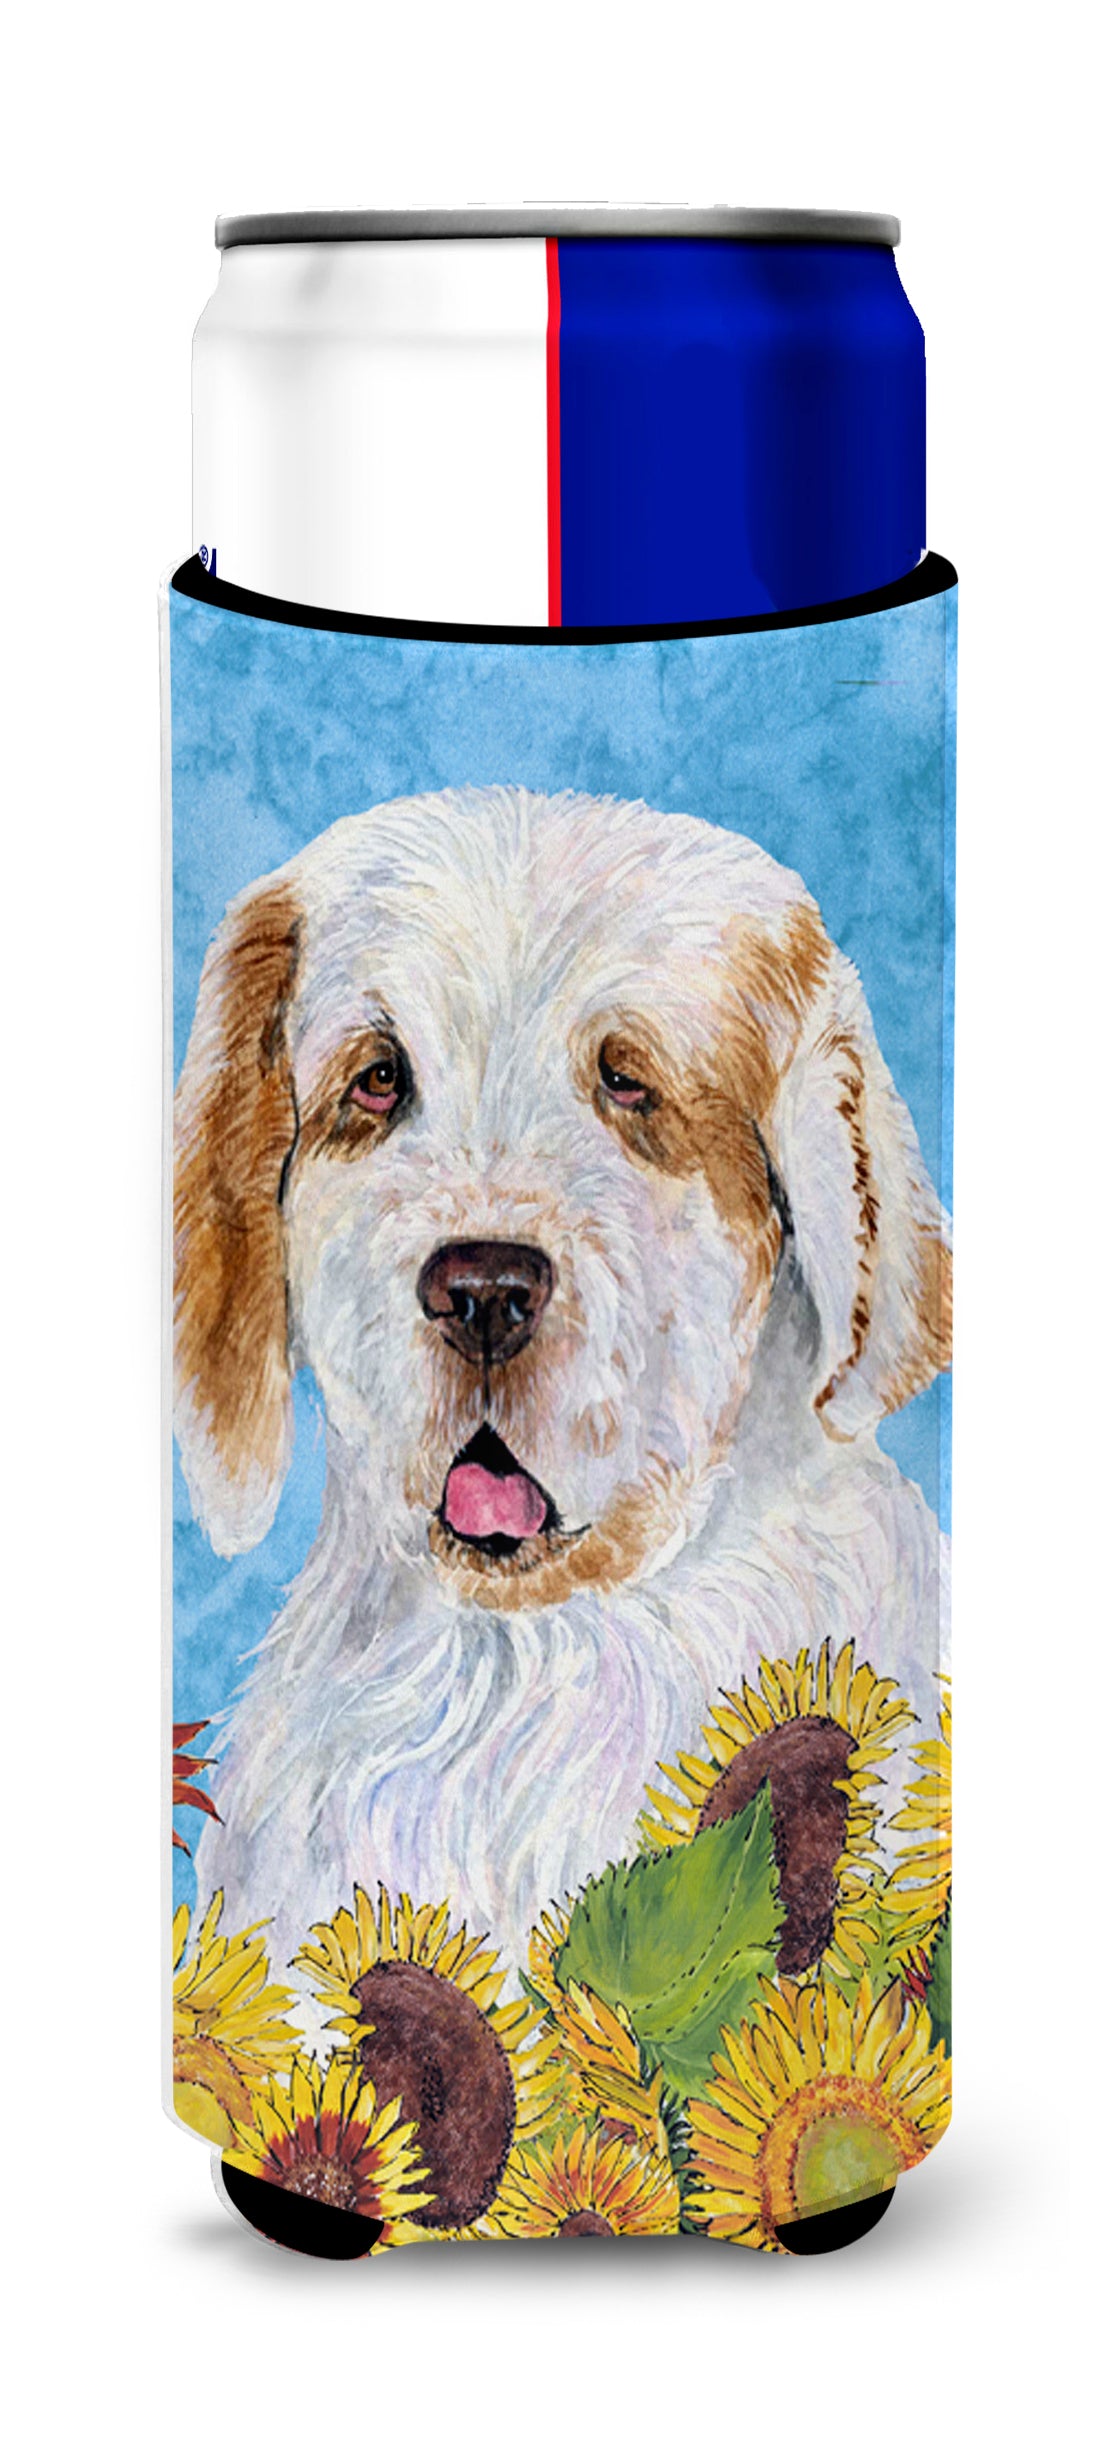 Clumber Spaniel in Summer Flowers Ultra Beverage Insulators for slim cans SS4133MUK.